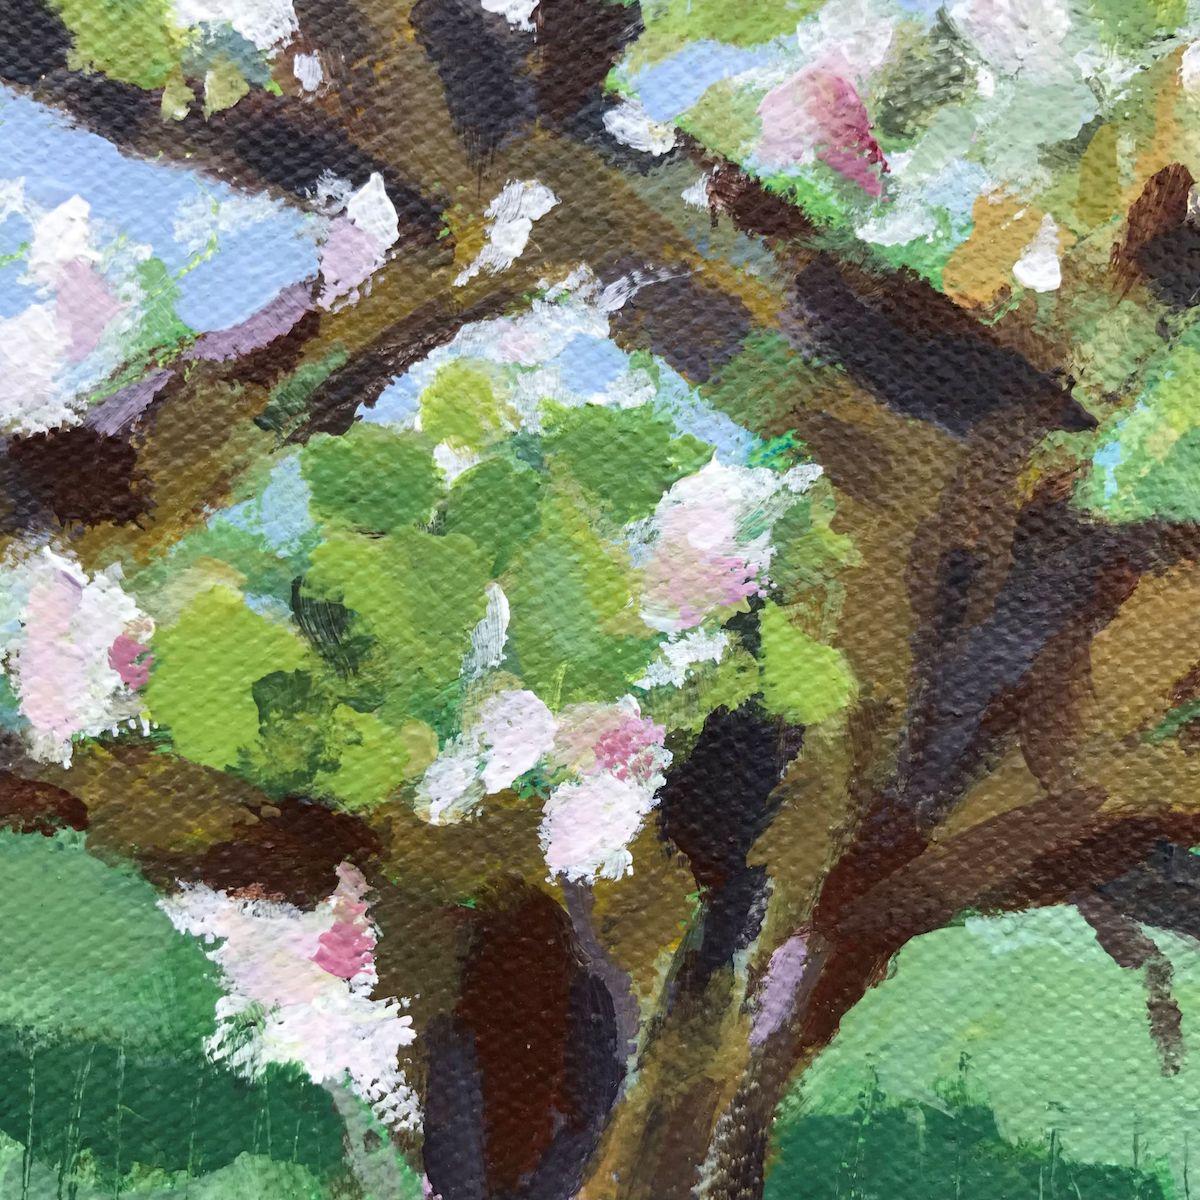 The old Apple Tree, Margaret Crutchley, Landscape art, Original painting  - Gray Landscape Painting by Margaret Crutchley 